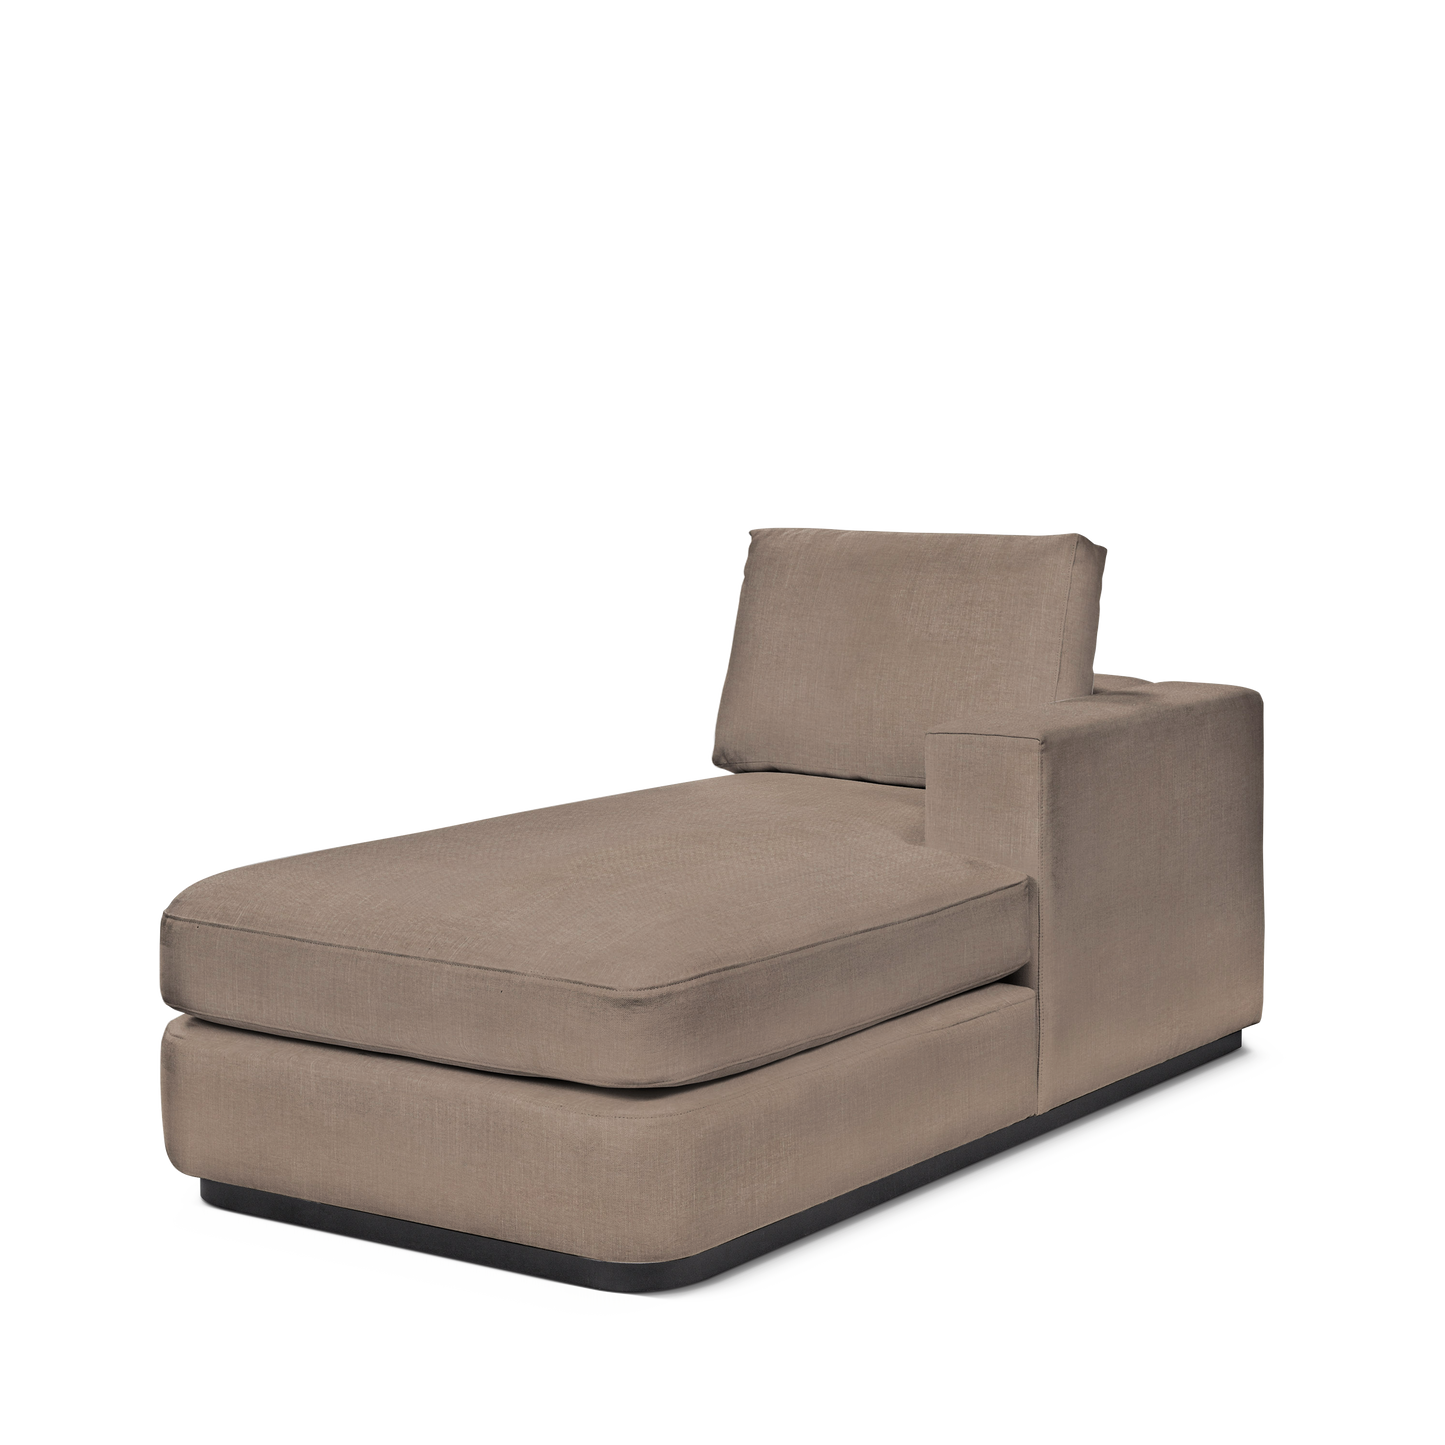 ATLAS 90 Lounge Bed arm rest right with linara brown textile